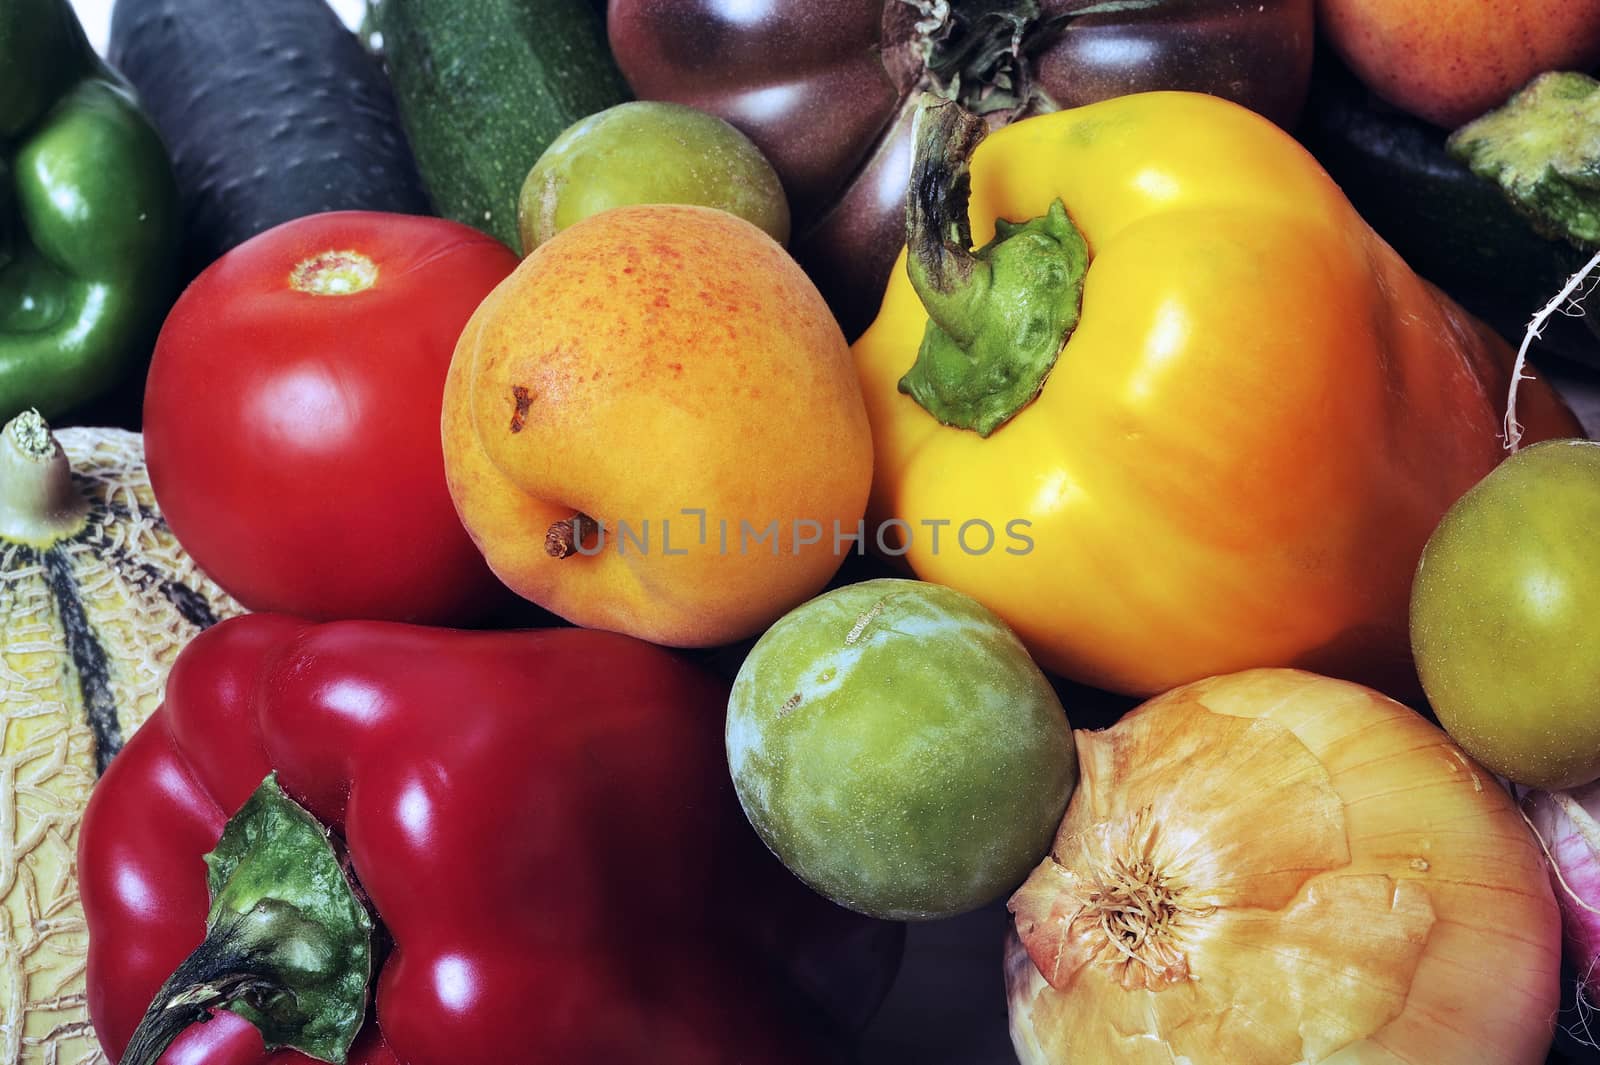 crates of fruit and vegetables on white background in studio. by gillespaire